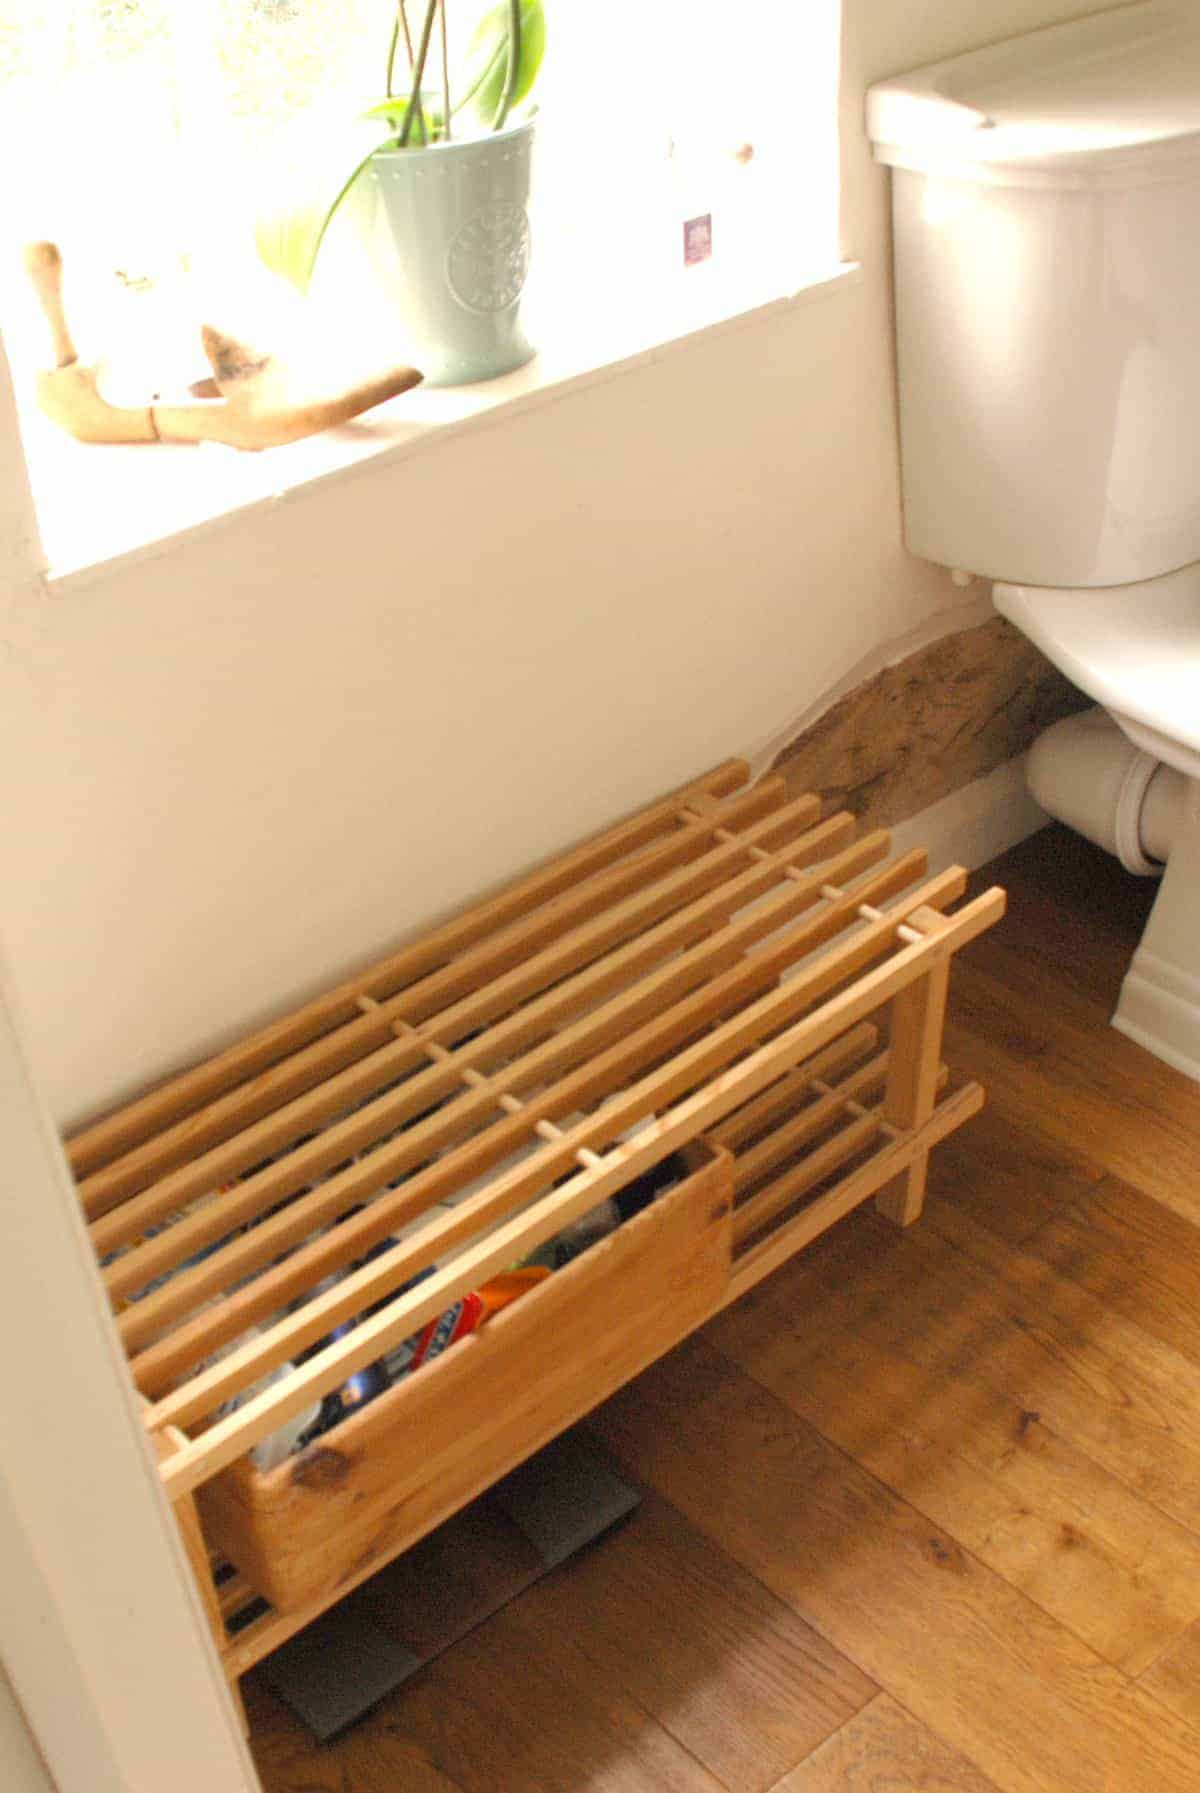 I turned a cheap IKEA shoe rack into sweet little bathroom bench seat, in this Ikea bench seat hack.